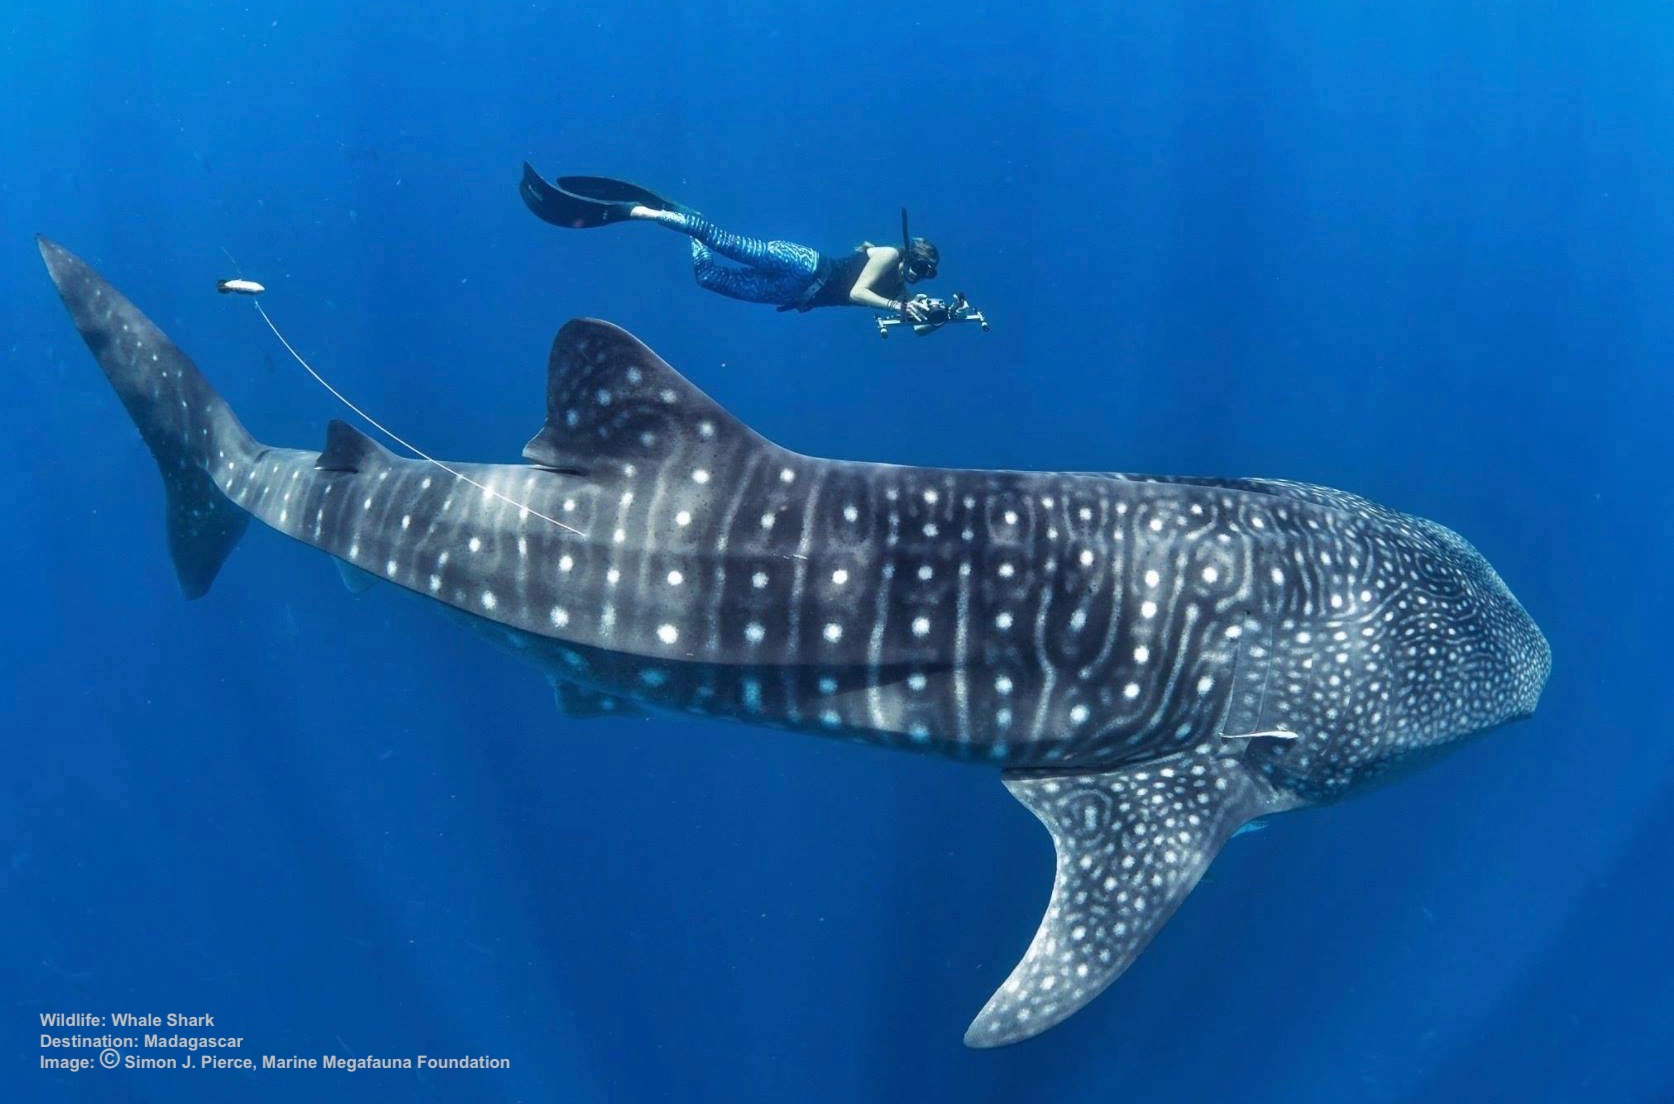 How to View & Swim Responsibly with Whale Sharks 